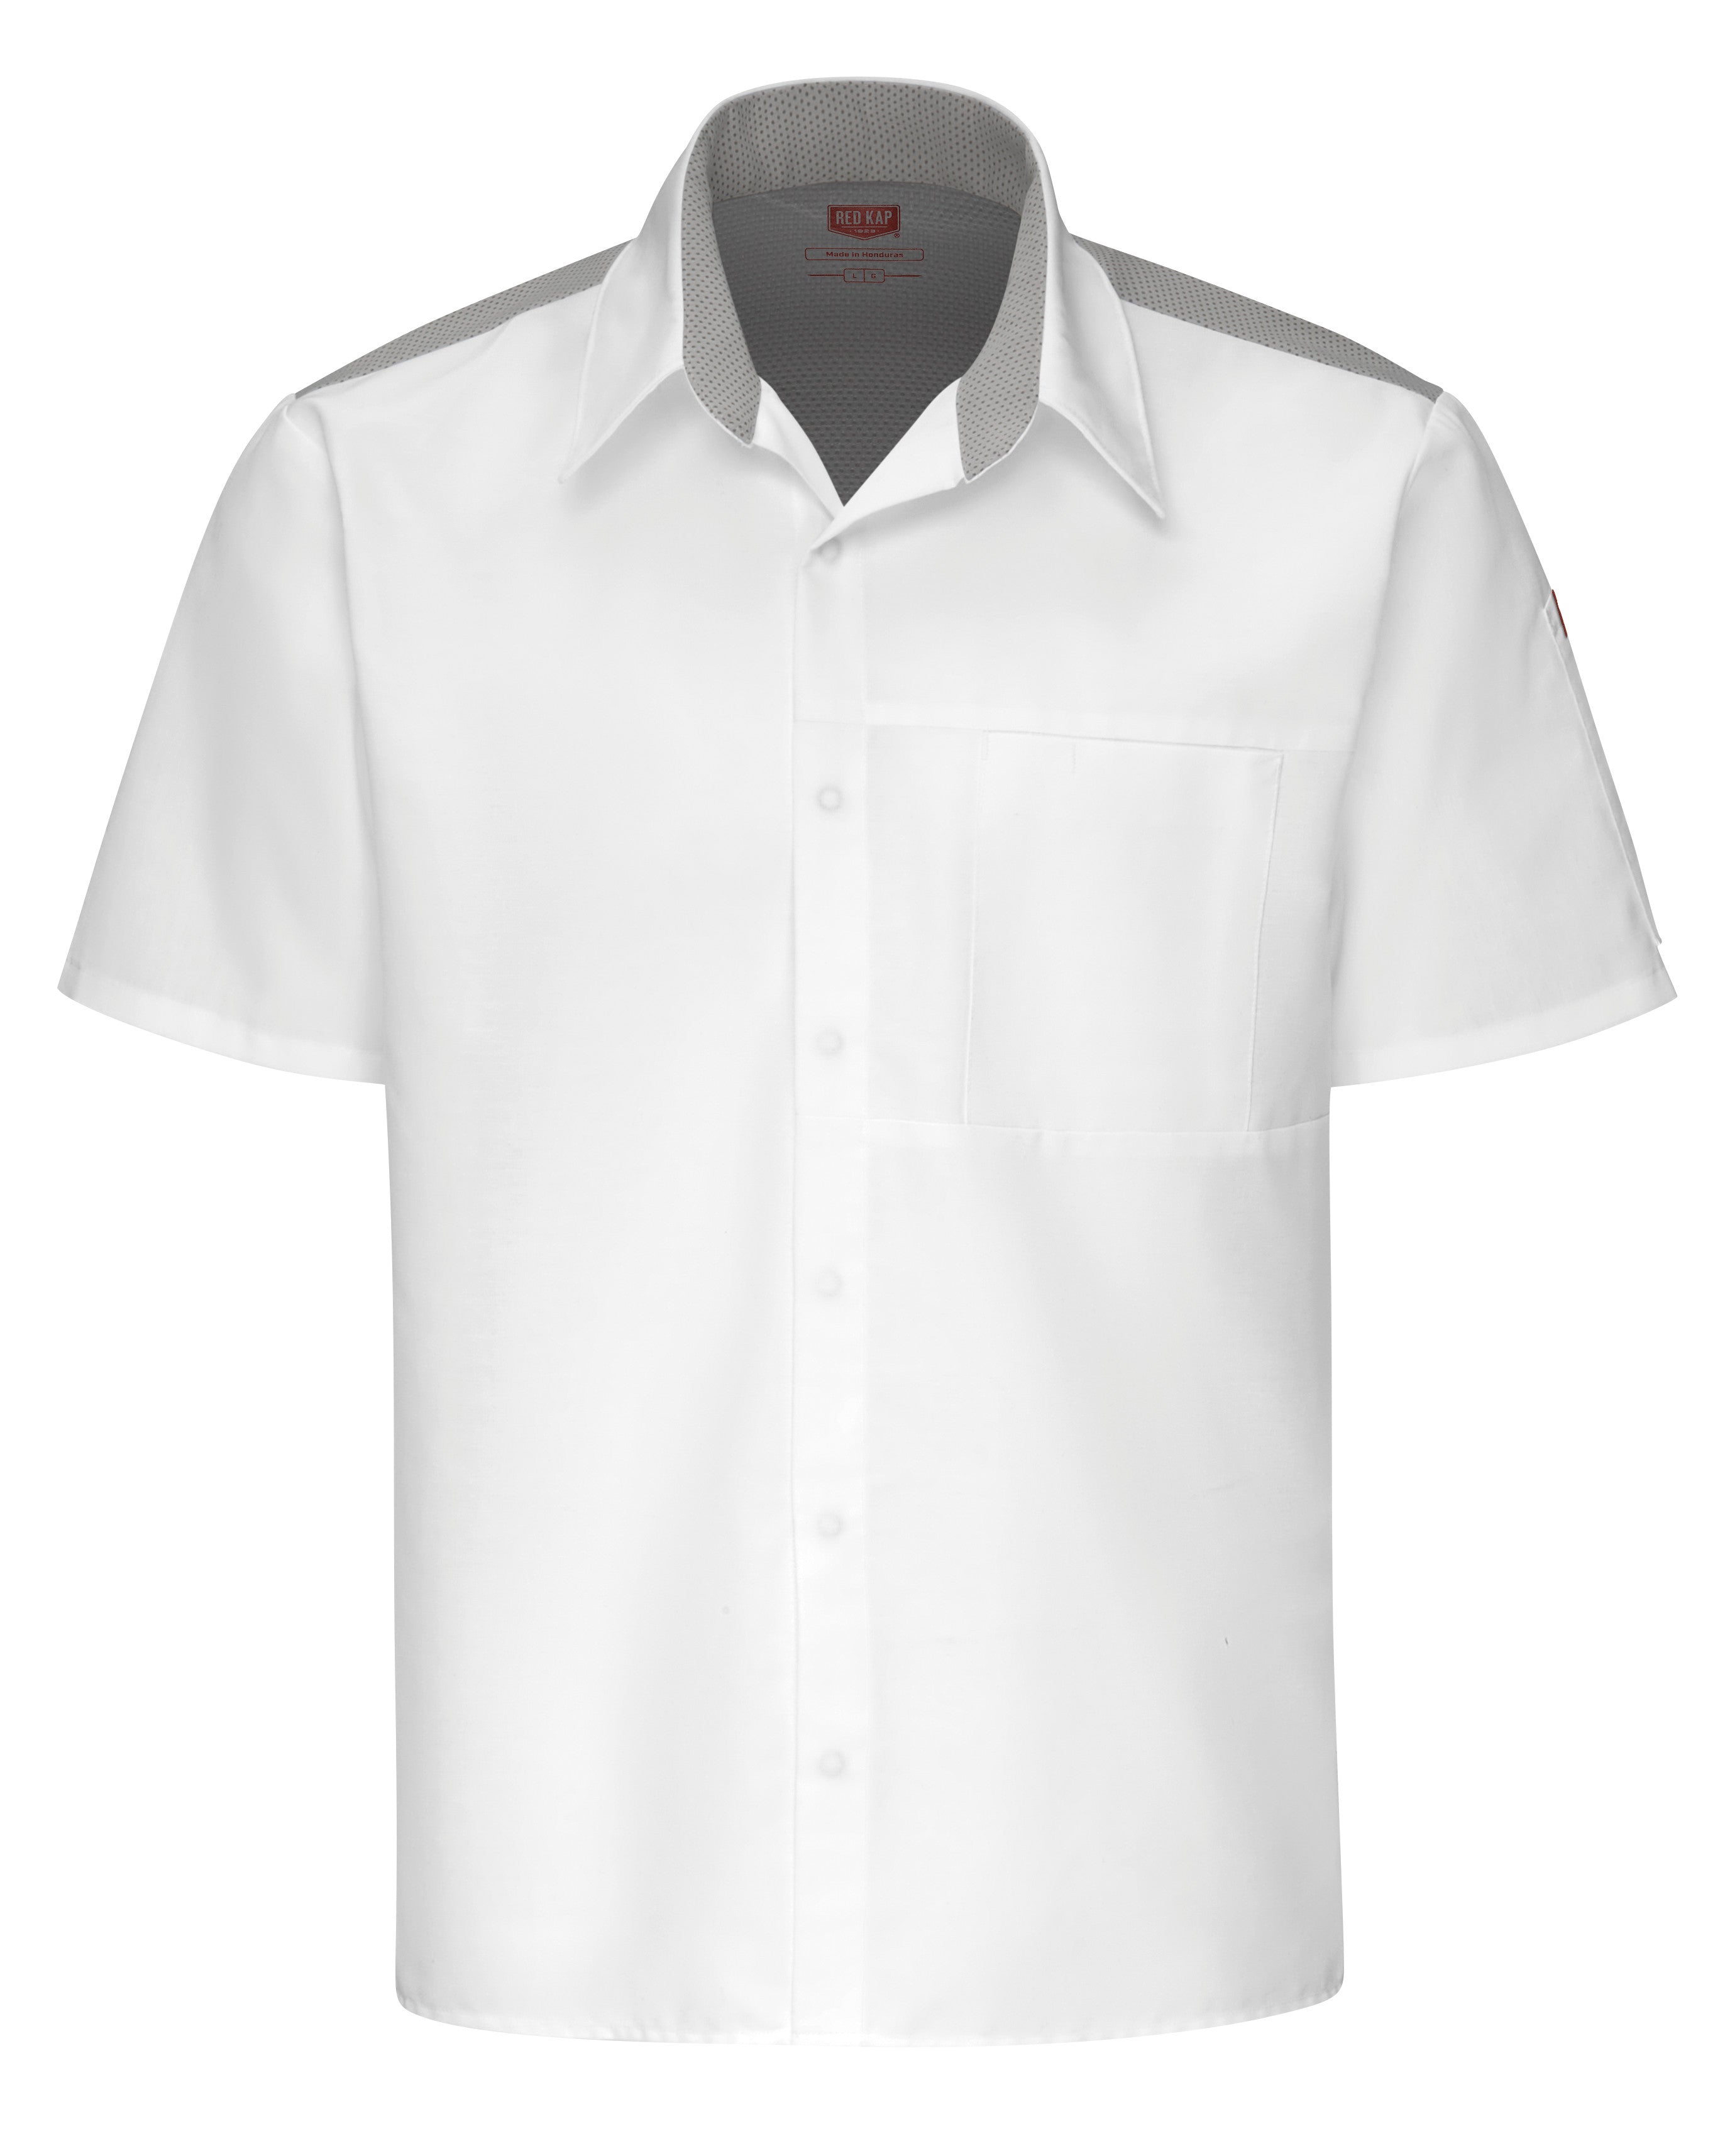 Men's Airflow Cook Shirt with OilBlok 502M - White with White/Gray Mesh-eSafety Supplies, Inc